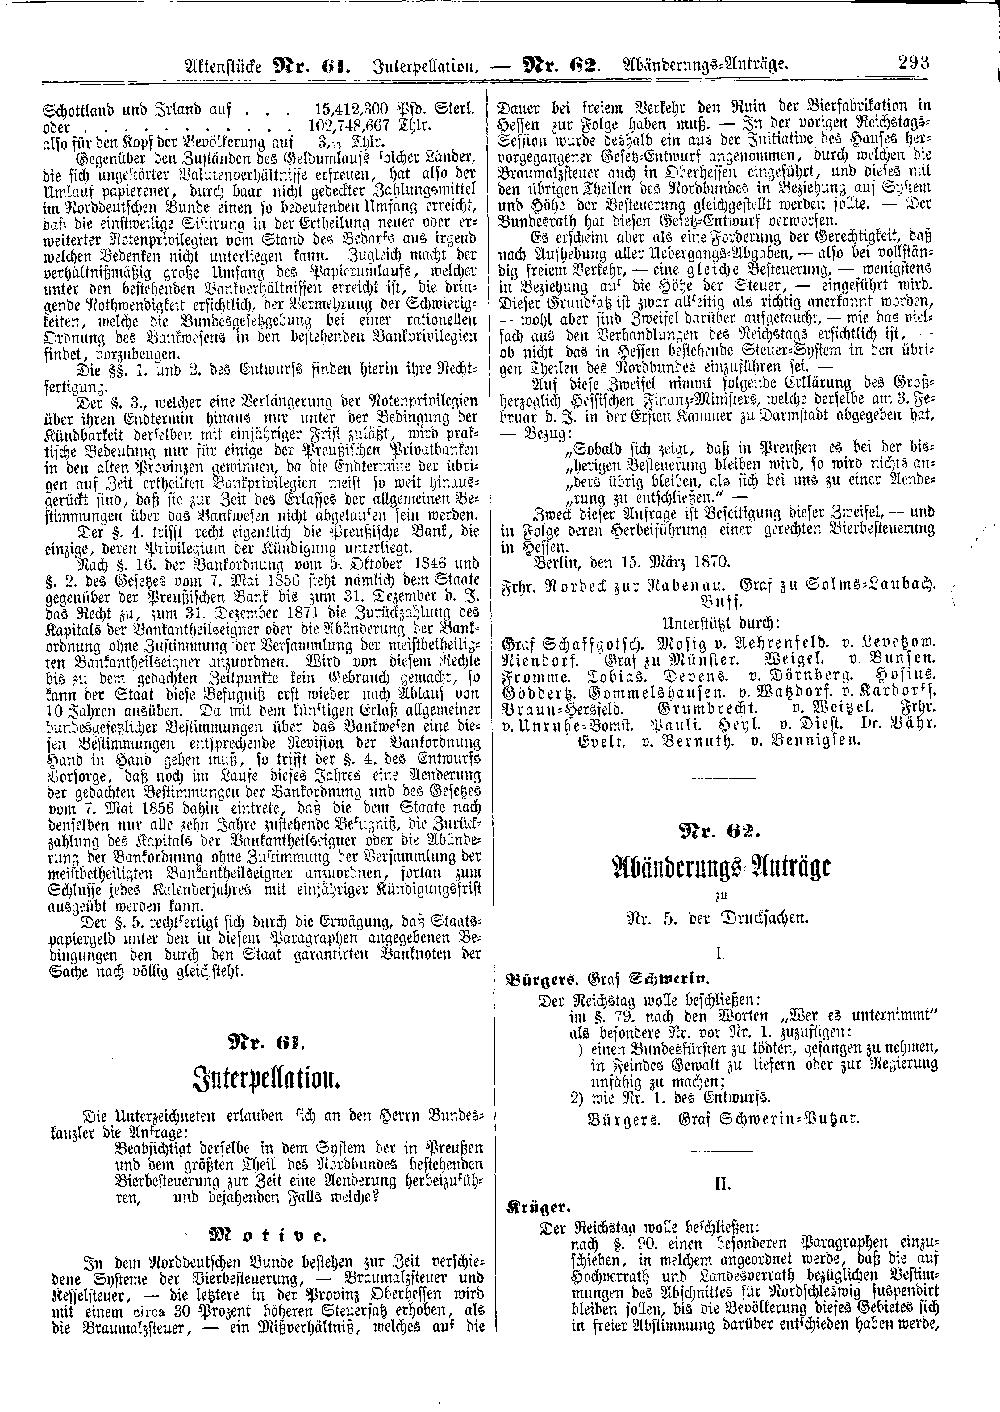 Scan of page 293